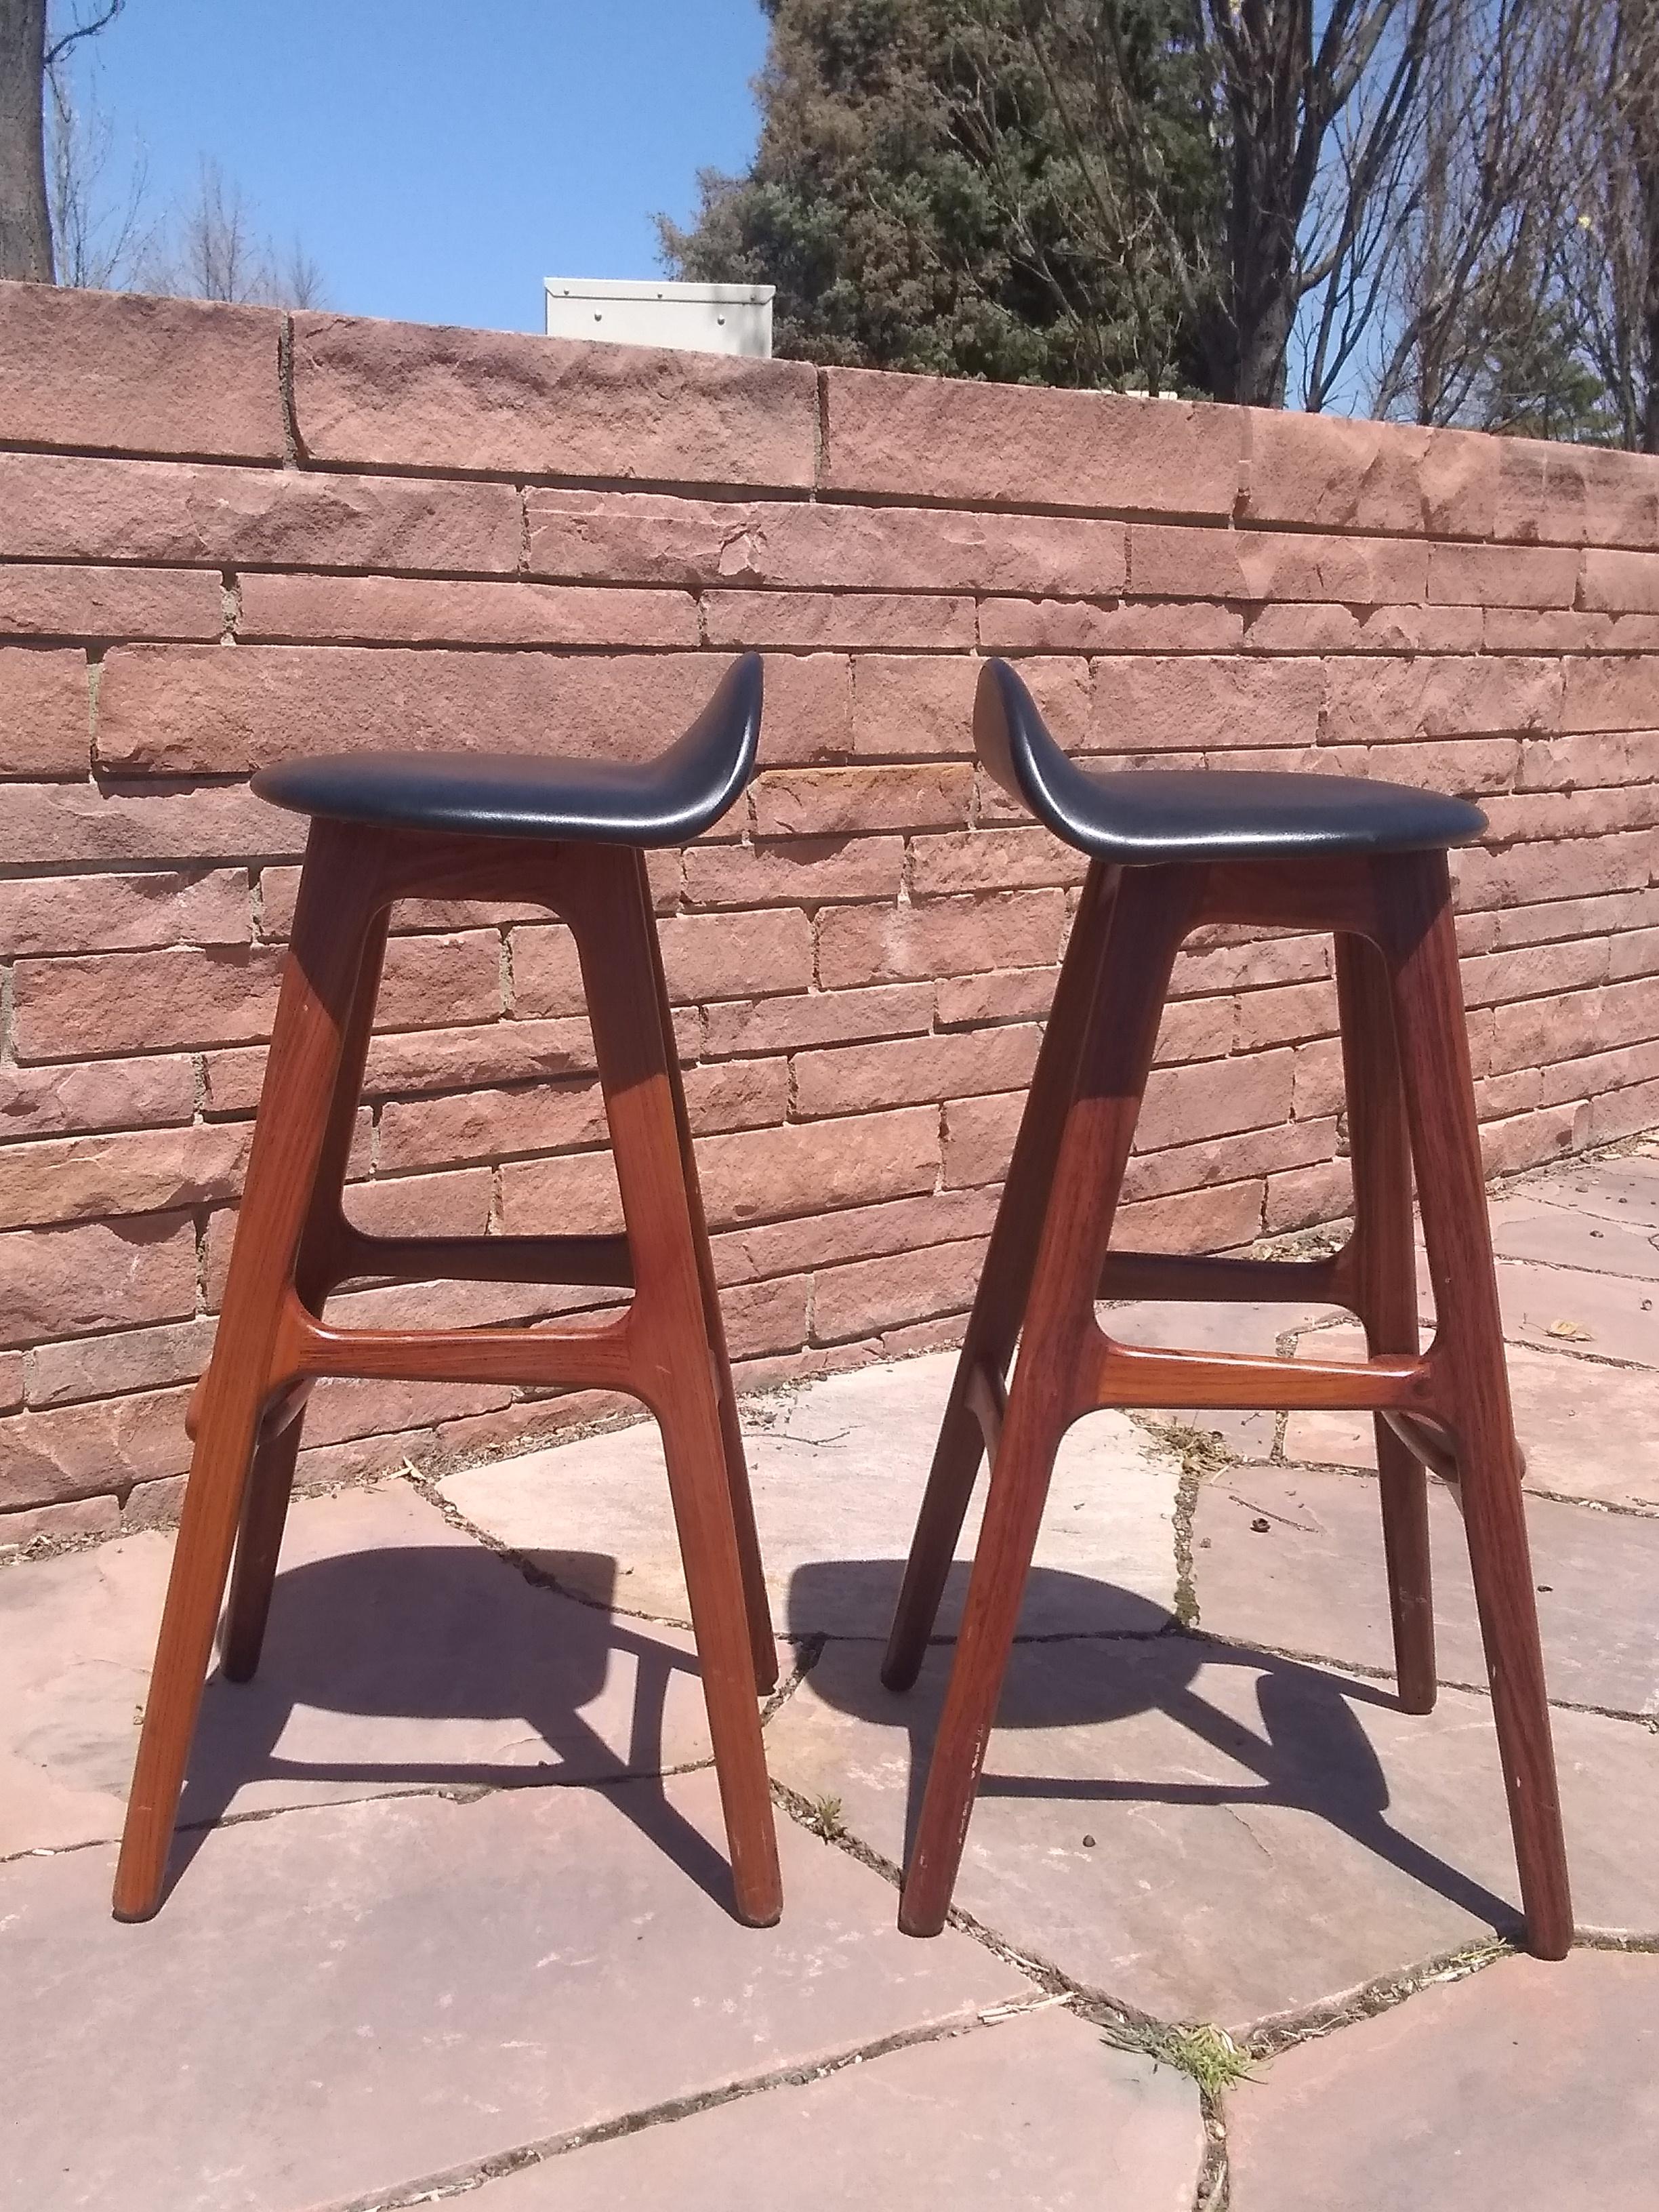 Amazing pair of Rosewood bar stools model OD61 by the Danish designer Erik Buck (Erik Buch) and manufactured by OD Mobler, 1960. Frame is rosewood and seat is upholstered in black leather. Excellent vintage condition.